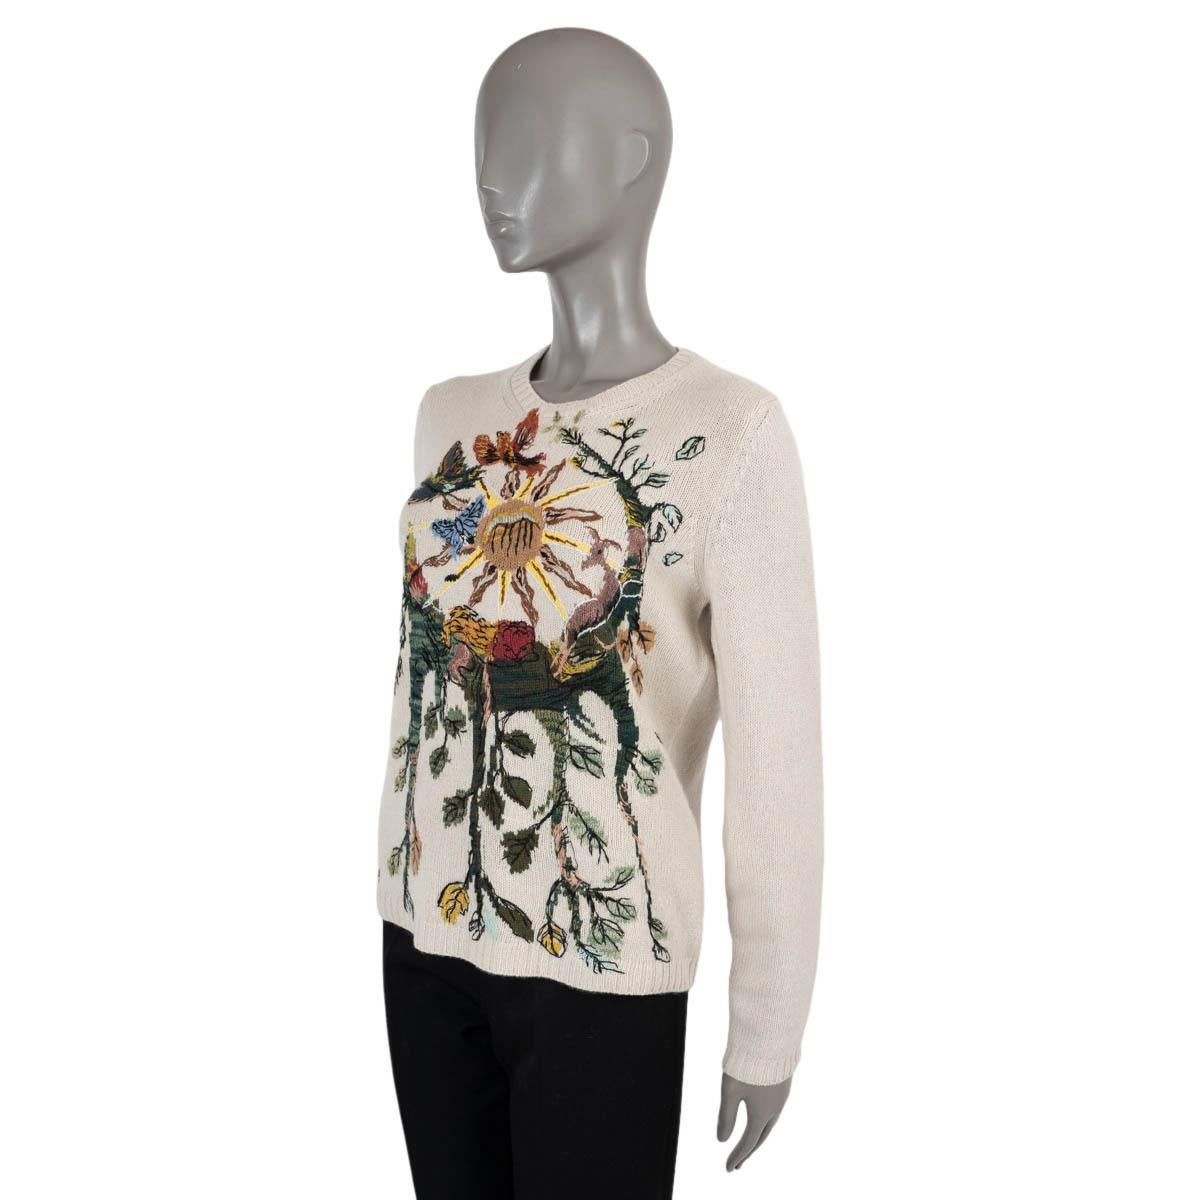 100% authentic Christian Dior embroidered sweater in ecru cashmere (100%) with details in forest green, green, burgundy, camel, yellow and brown wool (40%), acrylic (40%) and polyester (20%). Has been worn and is in excellent condition. 

2019